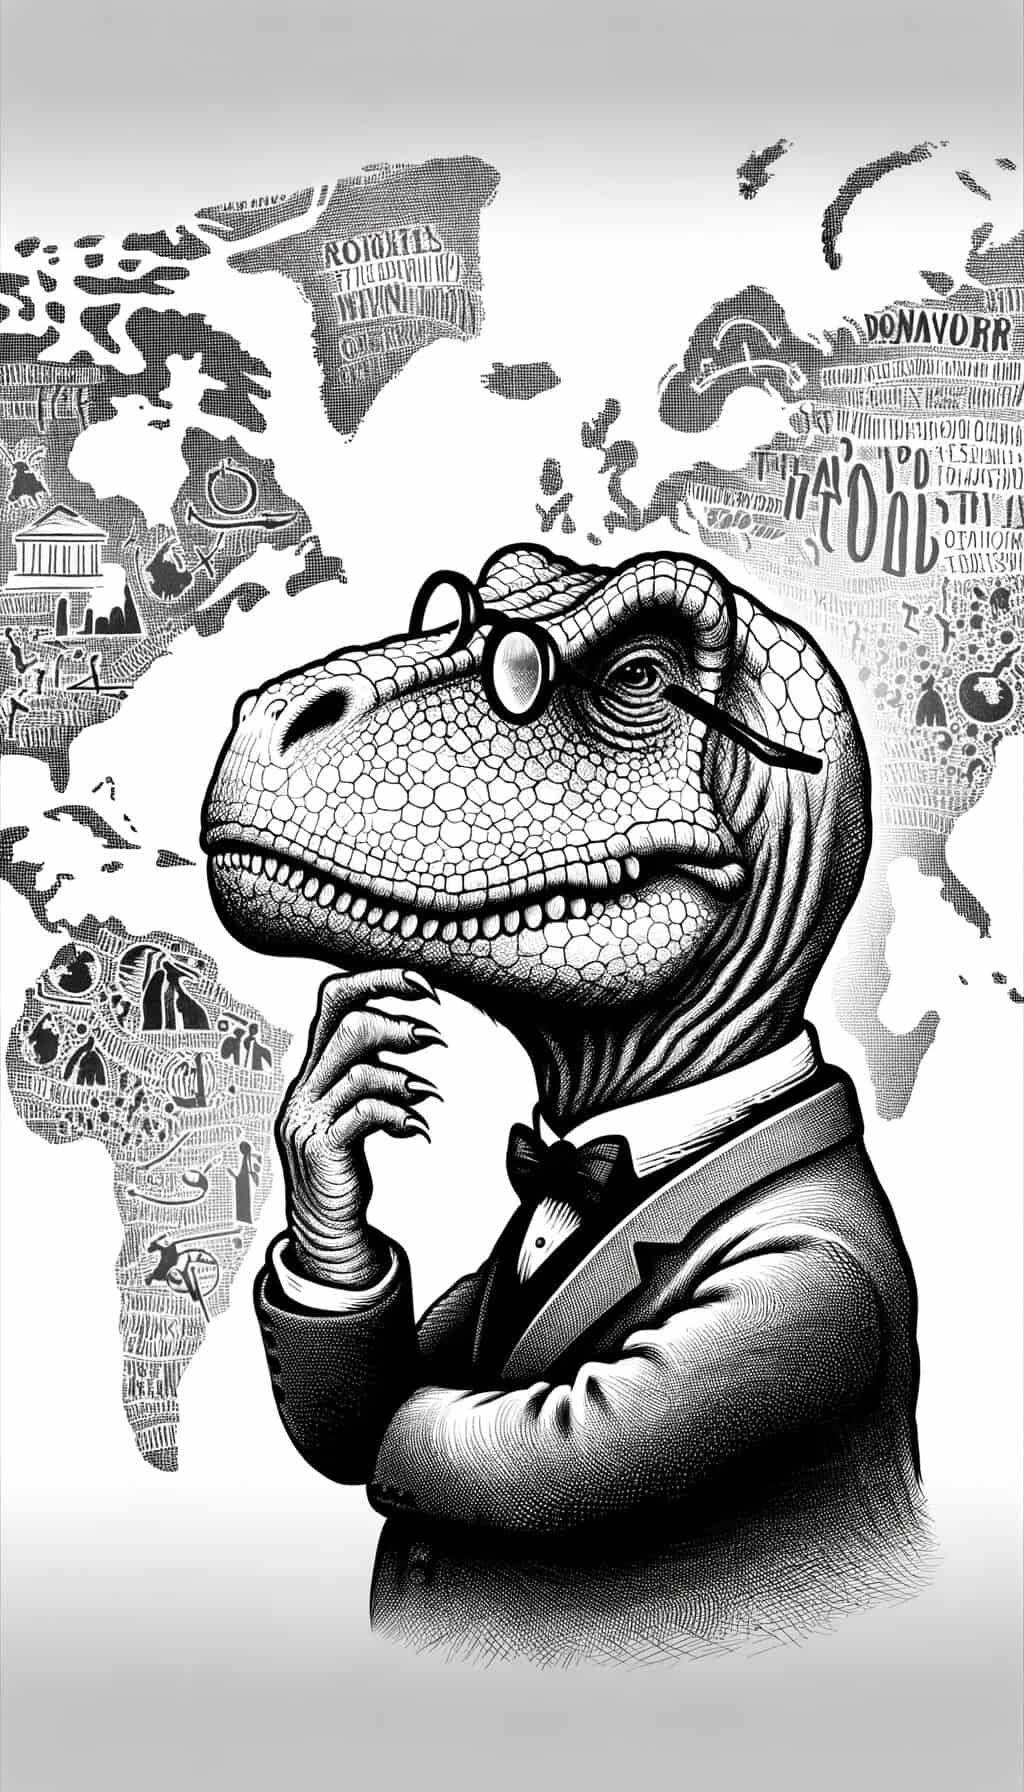 
A vertical black and white doodle depicting a distinguished dinosaur in a thoughtful pose